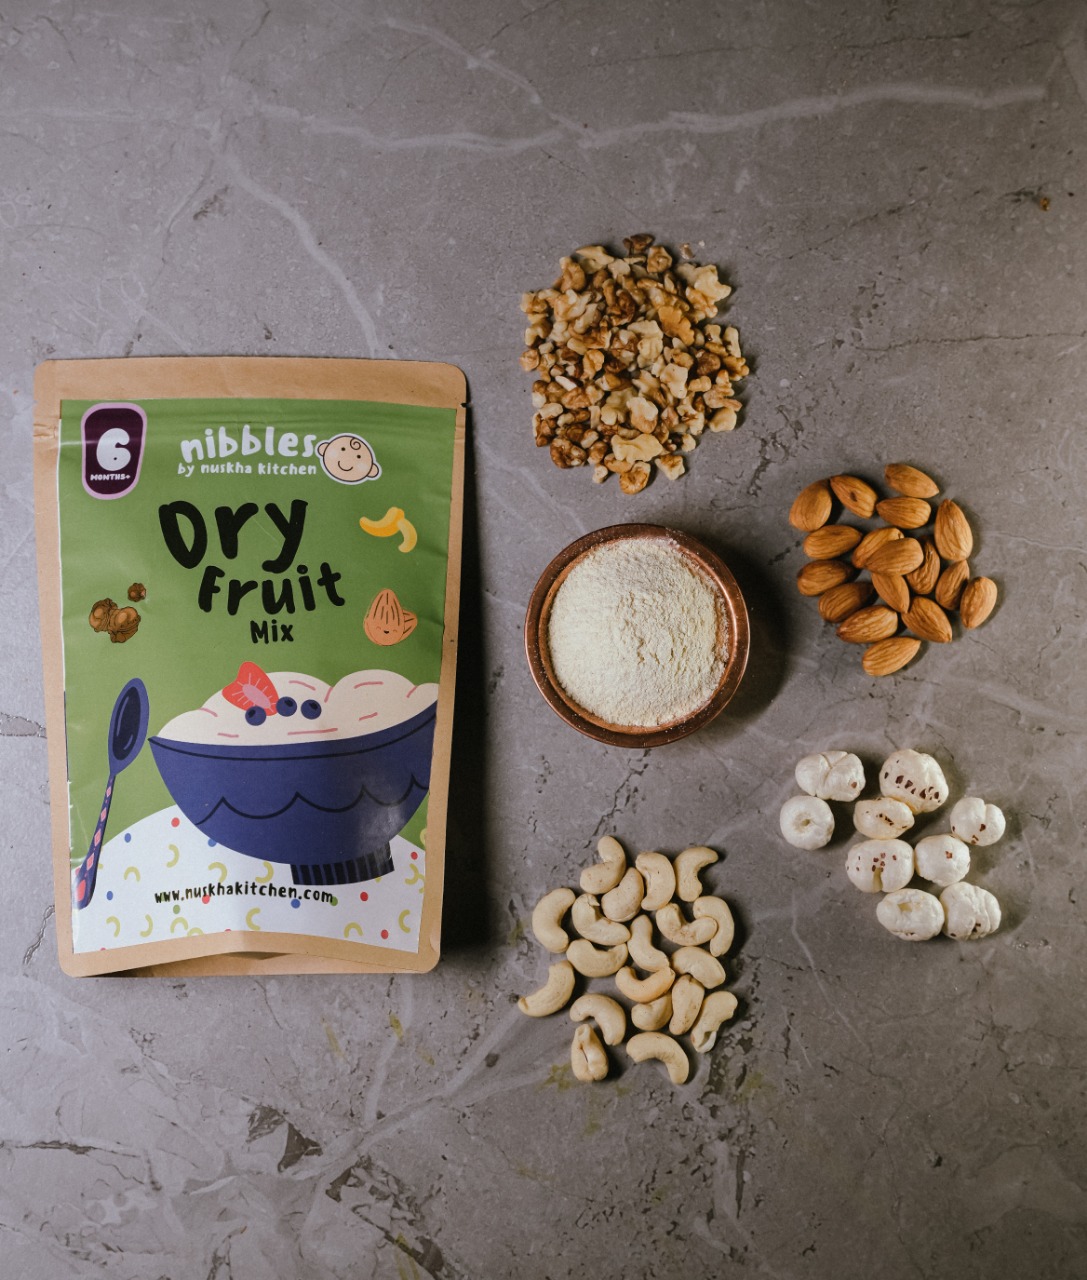 Nibble Dry Fruit Mix